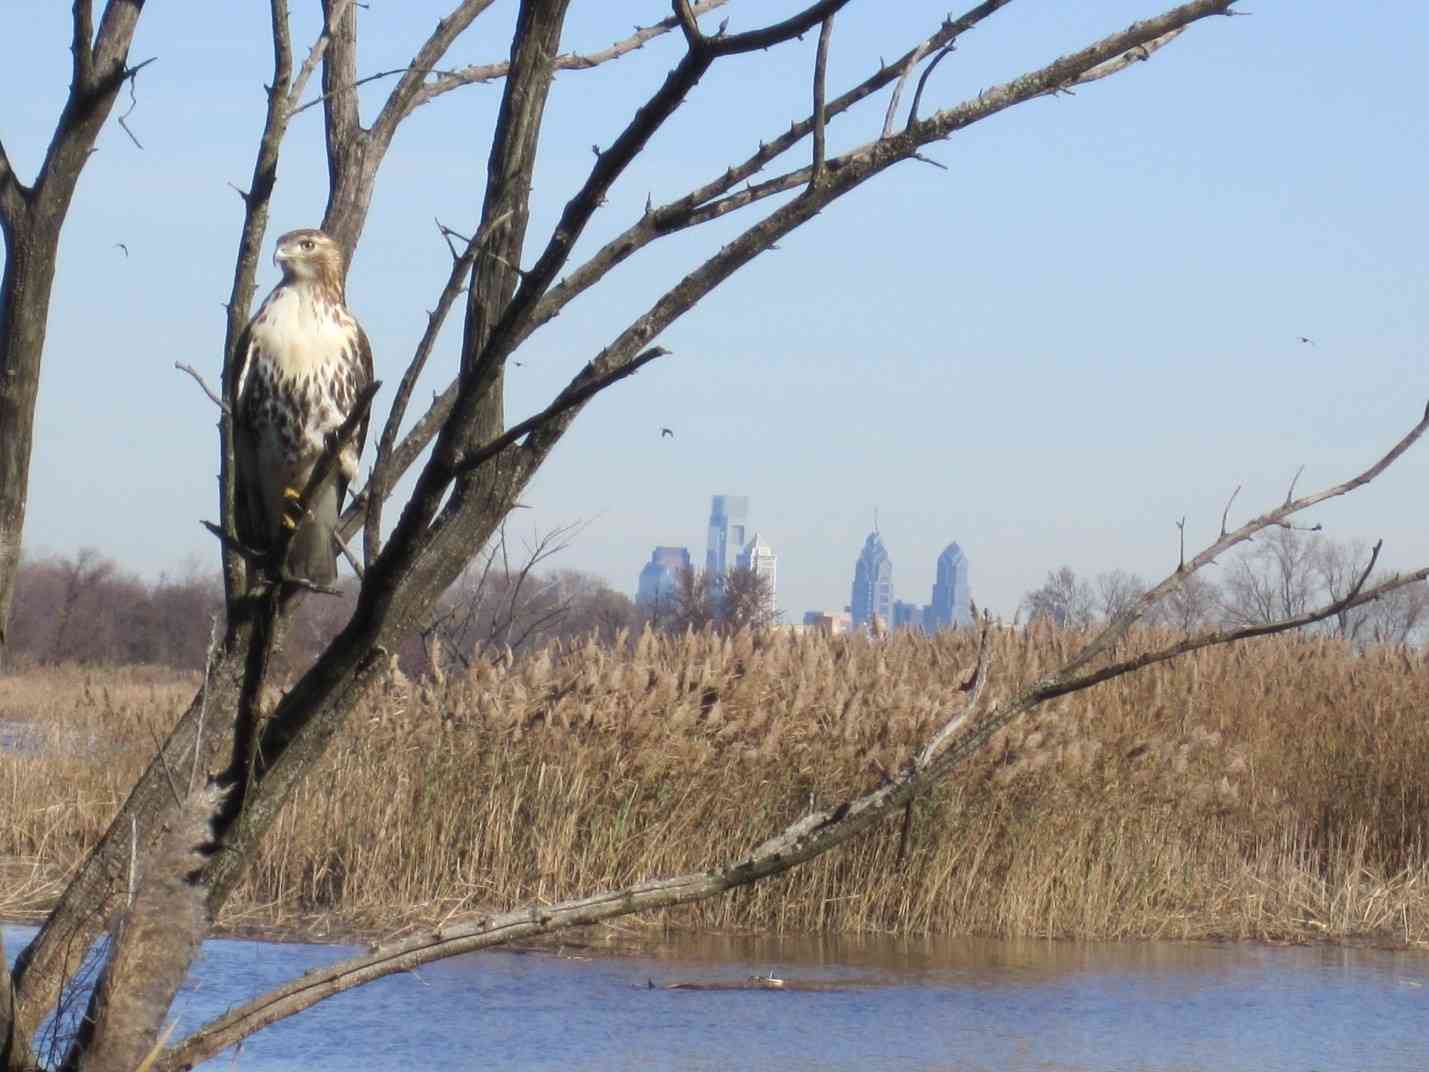 Overlooking the prominent Philadelphia skyline and a hawk from the John Heinz National Wildlife Refuge